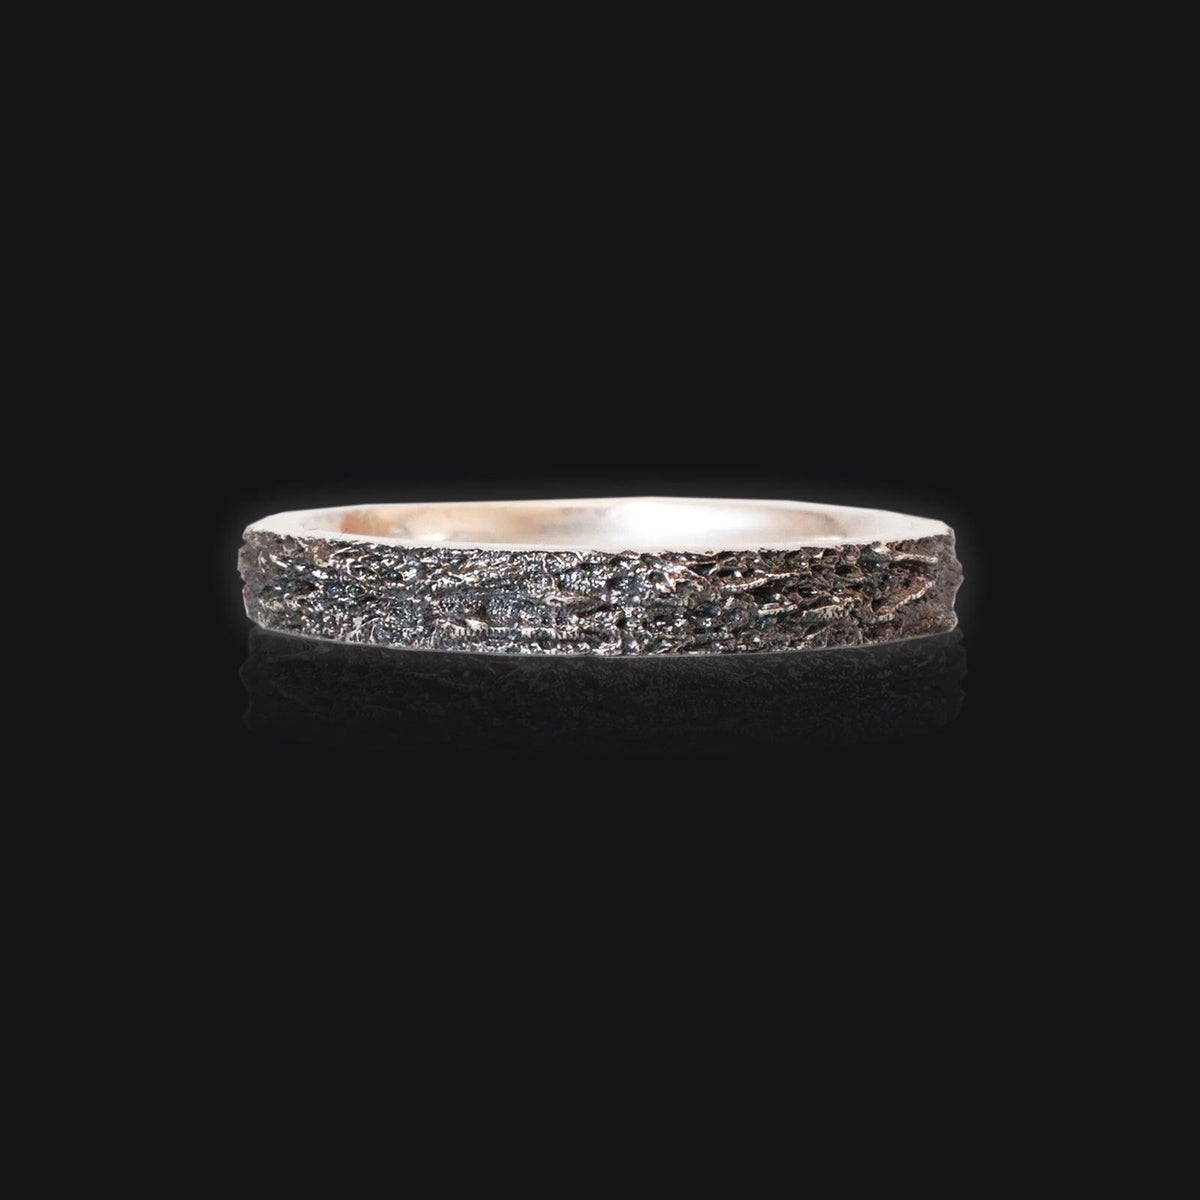 Oxidized Meteoroid Ring Band in Sterling Silver, 3mm - Tippy Taste Jewelry